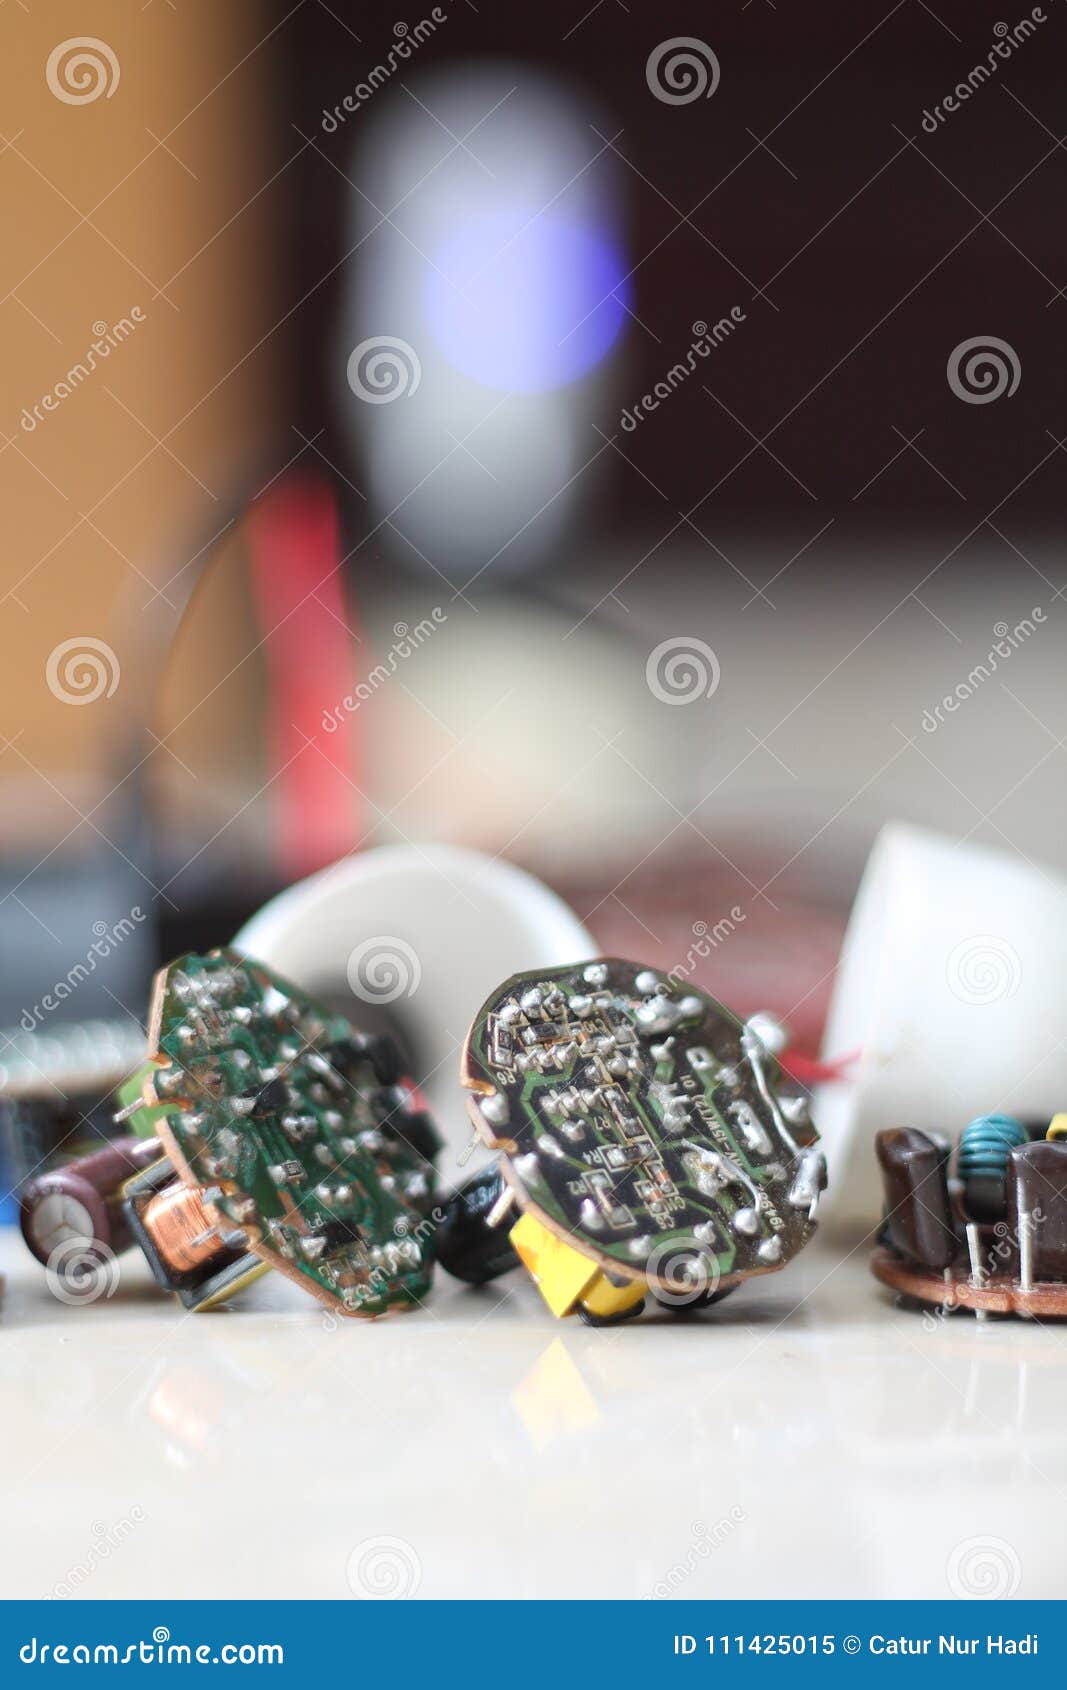 Various Electrical Devices, Version 5 Stock Image - Image of electronic